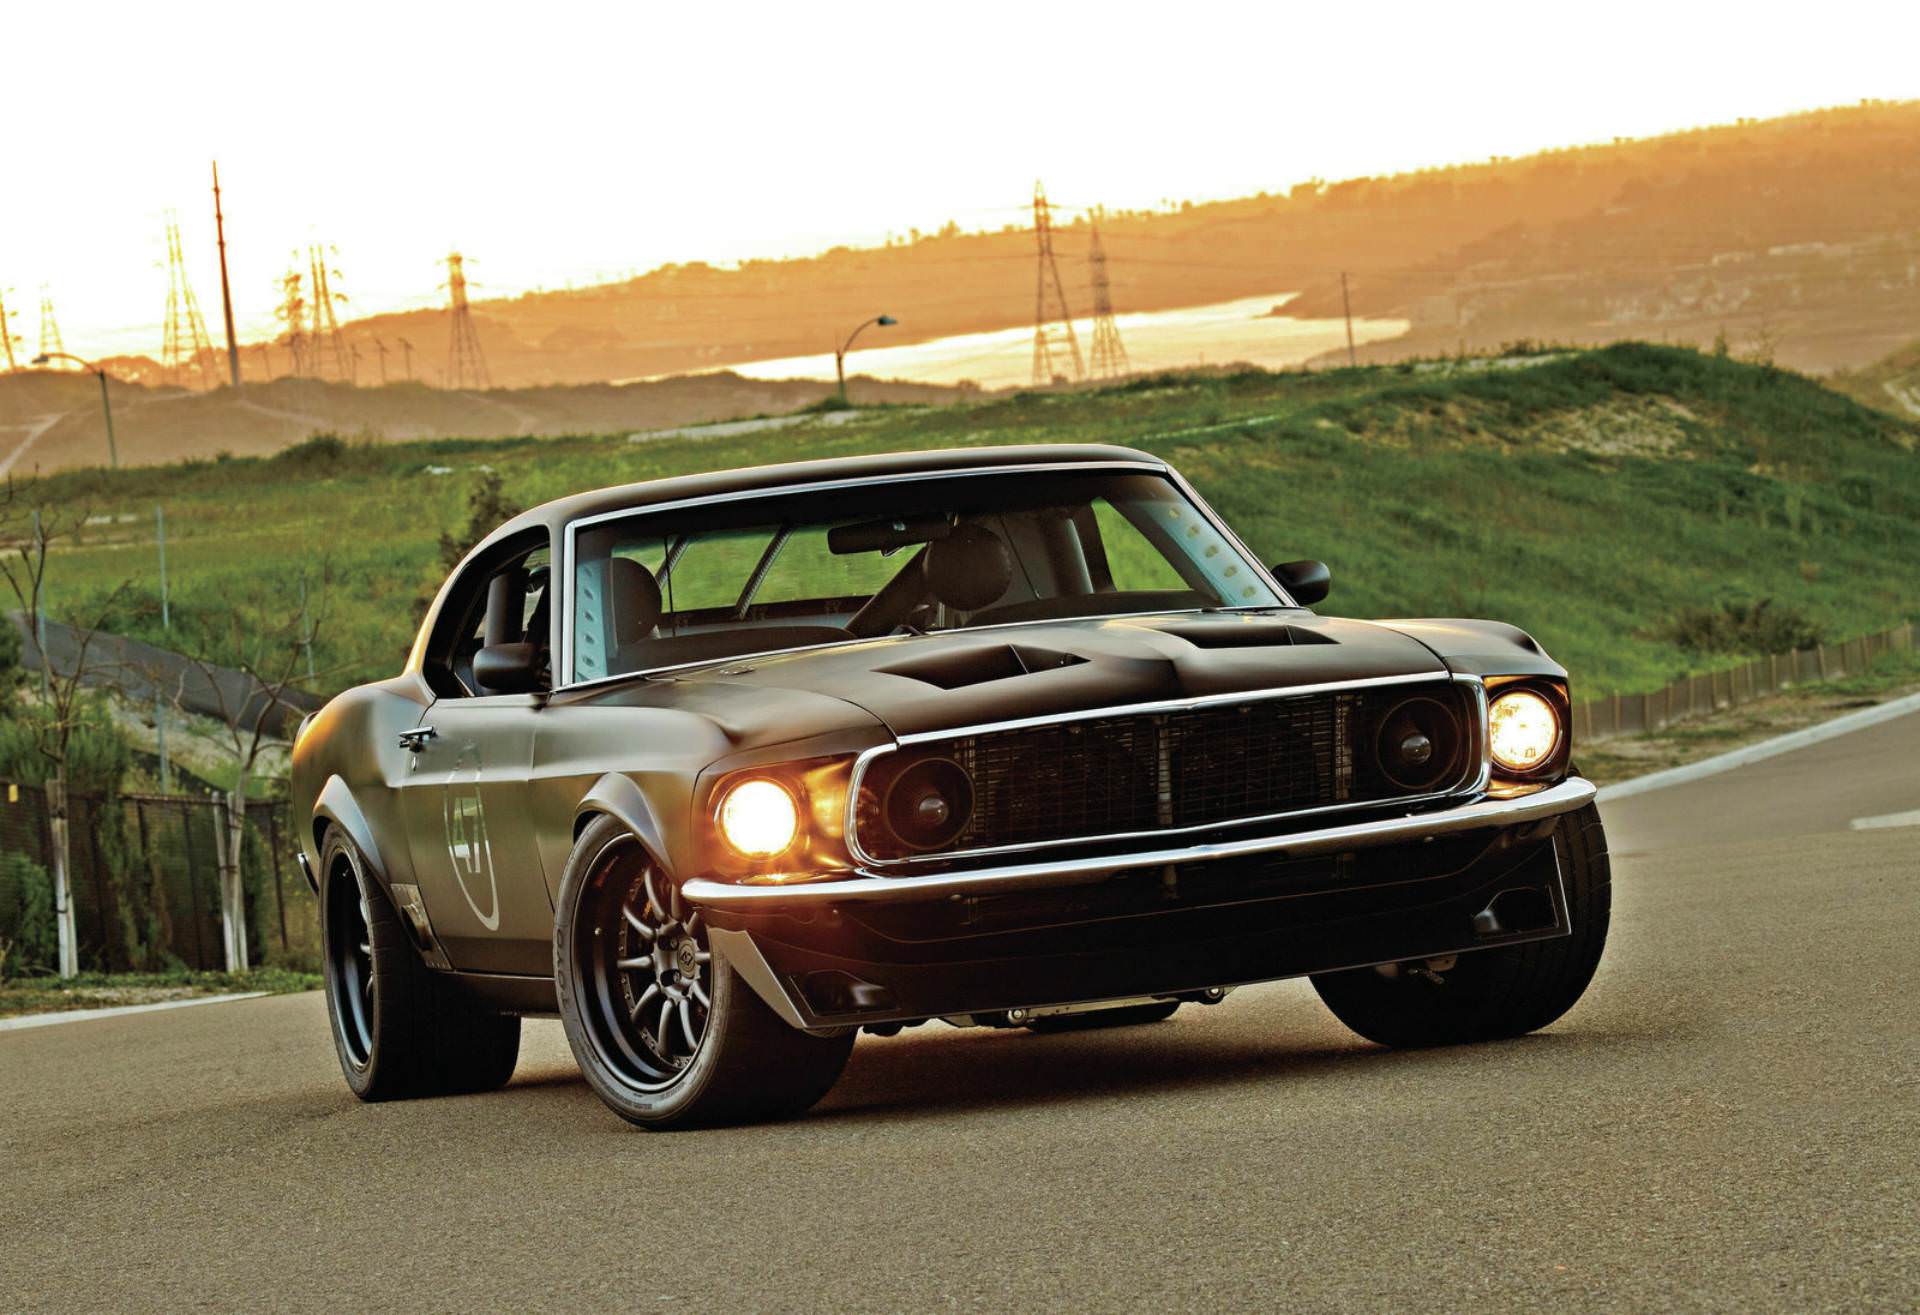 Classic Ford Muscle Car Wallpapers - Top Free Classic Ford Muscle Car